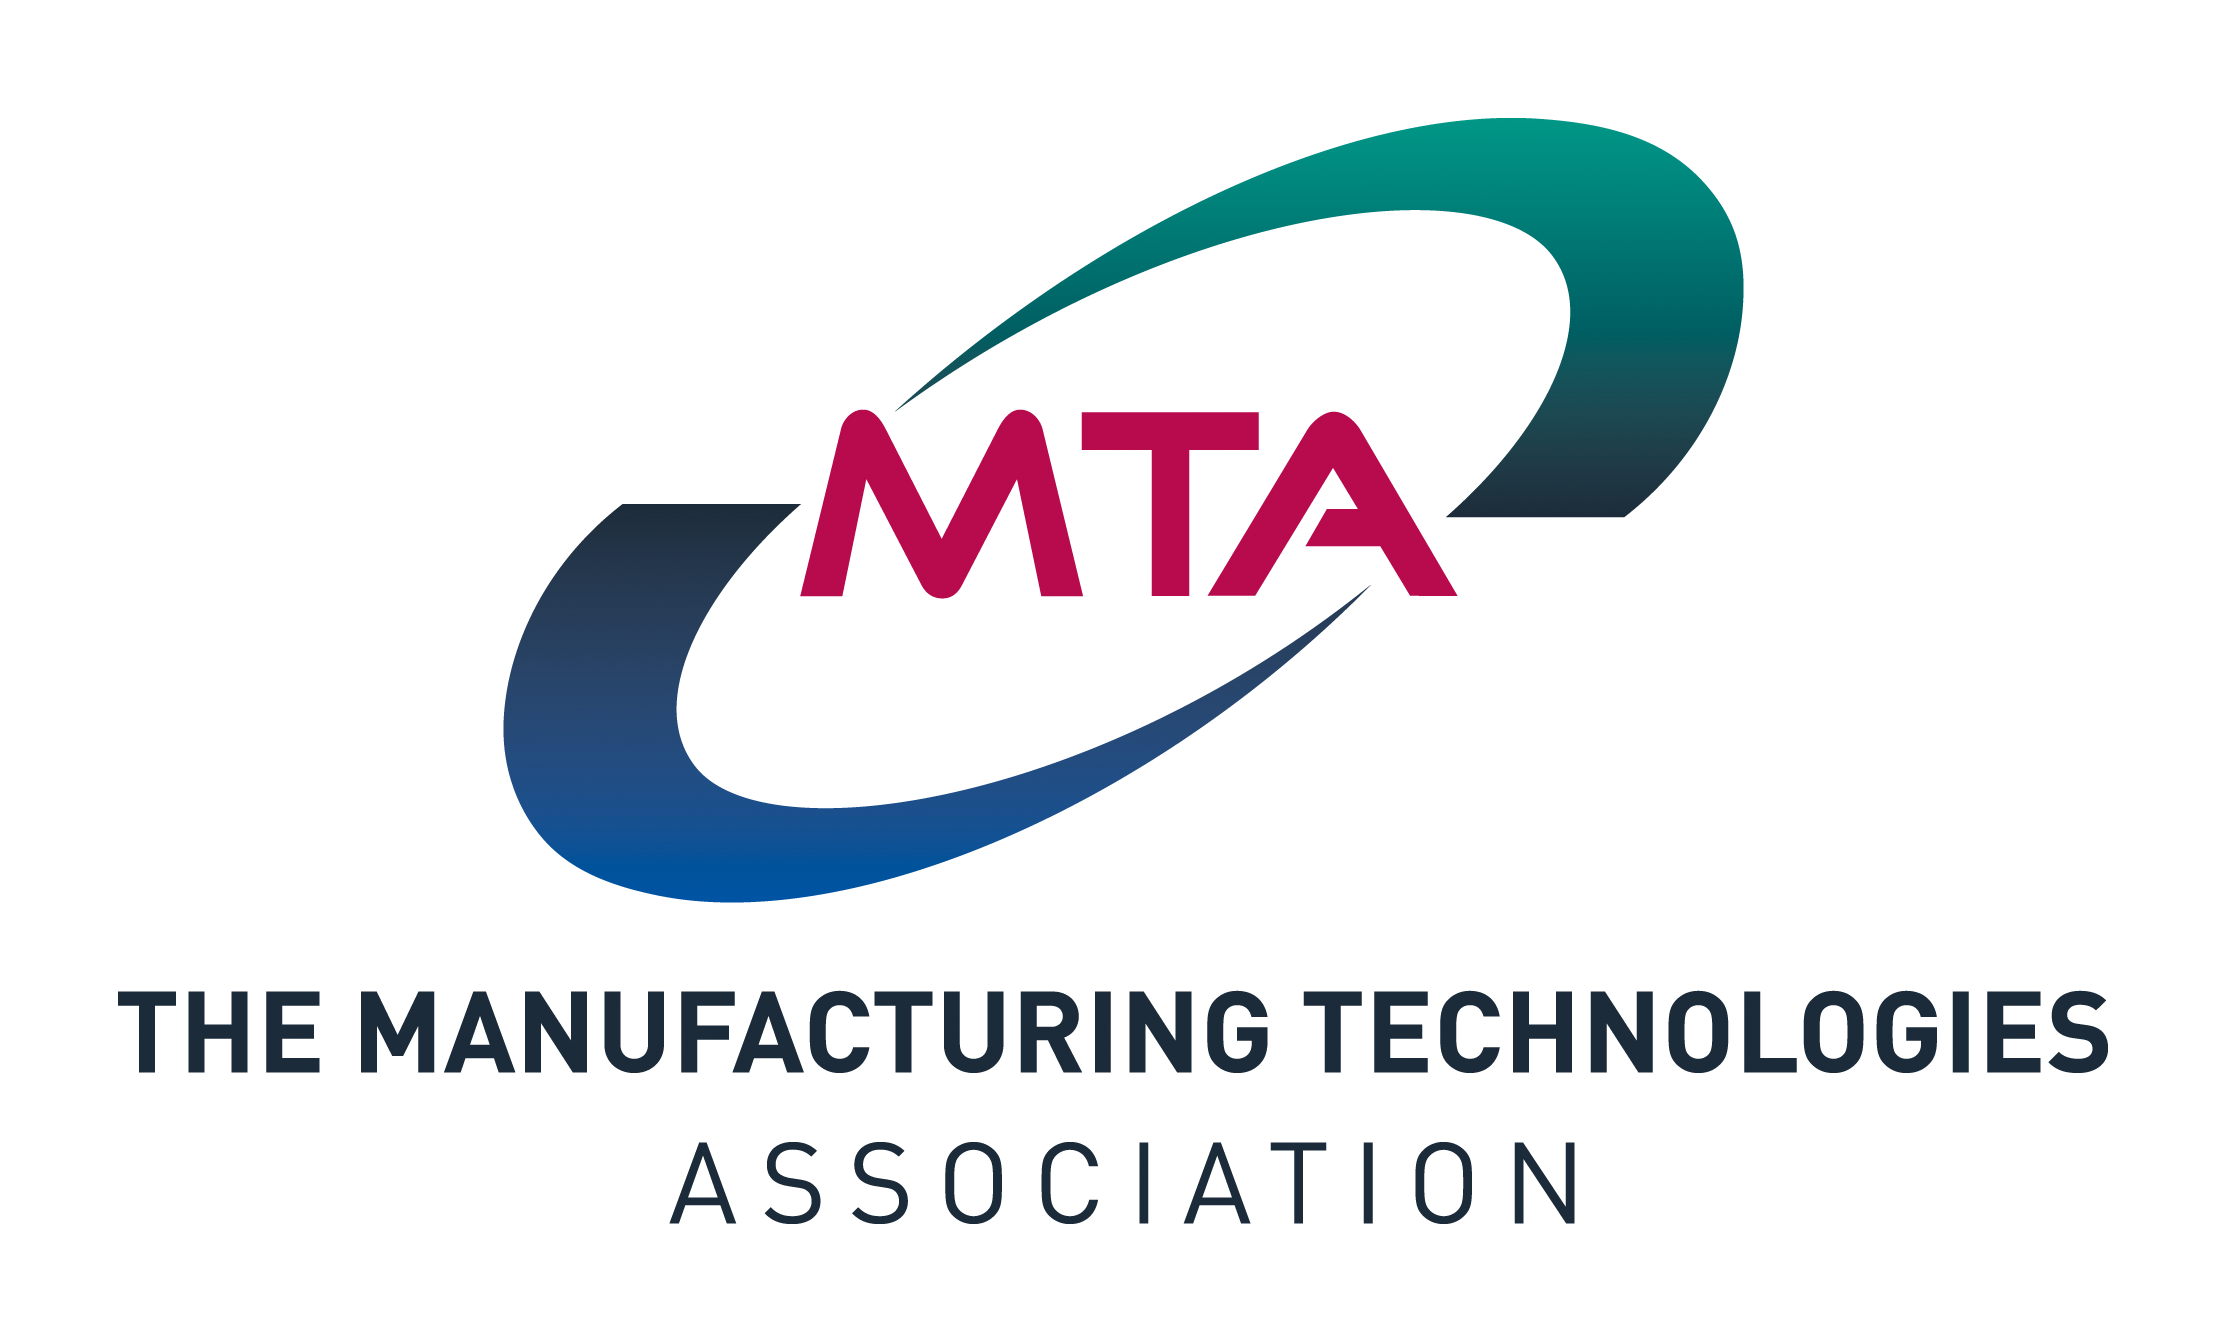 THE MANUFACTURING TECHNOLOGIES ASSOCIATION